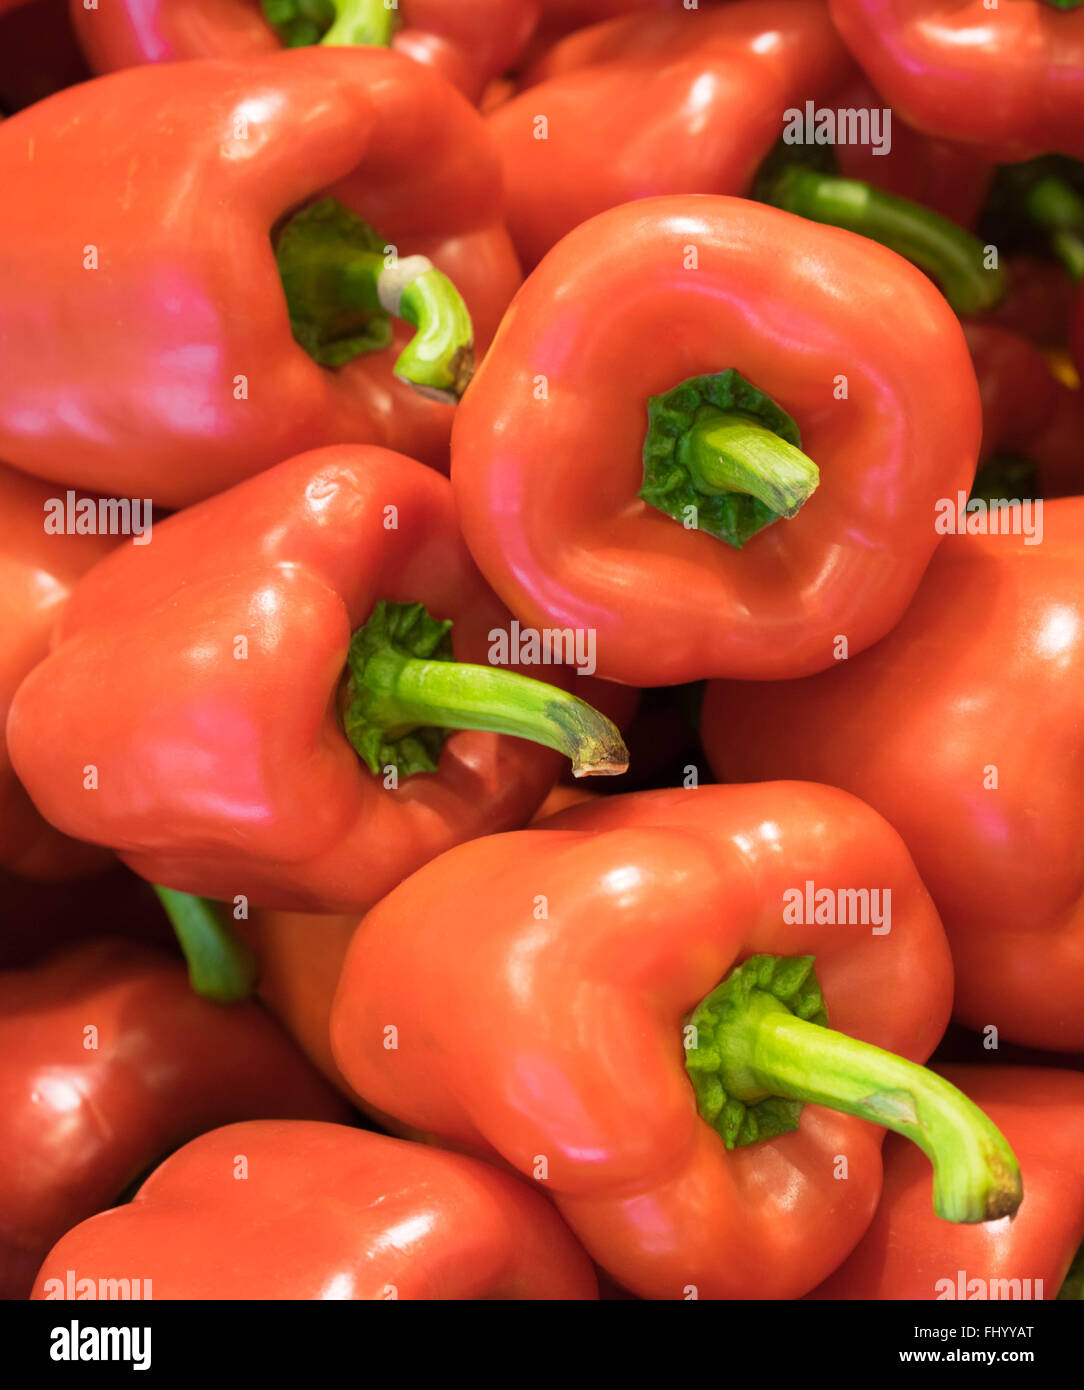 Red bell peppers (capsicum) background Stock Photo